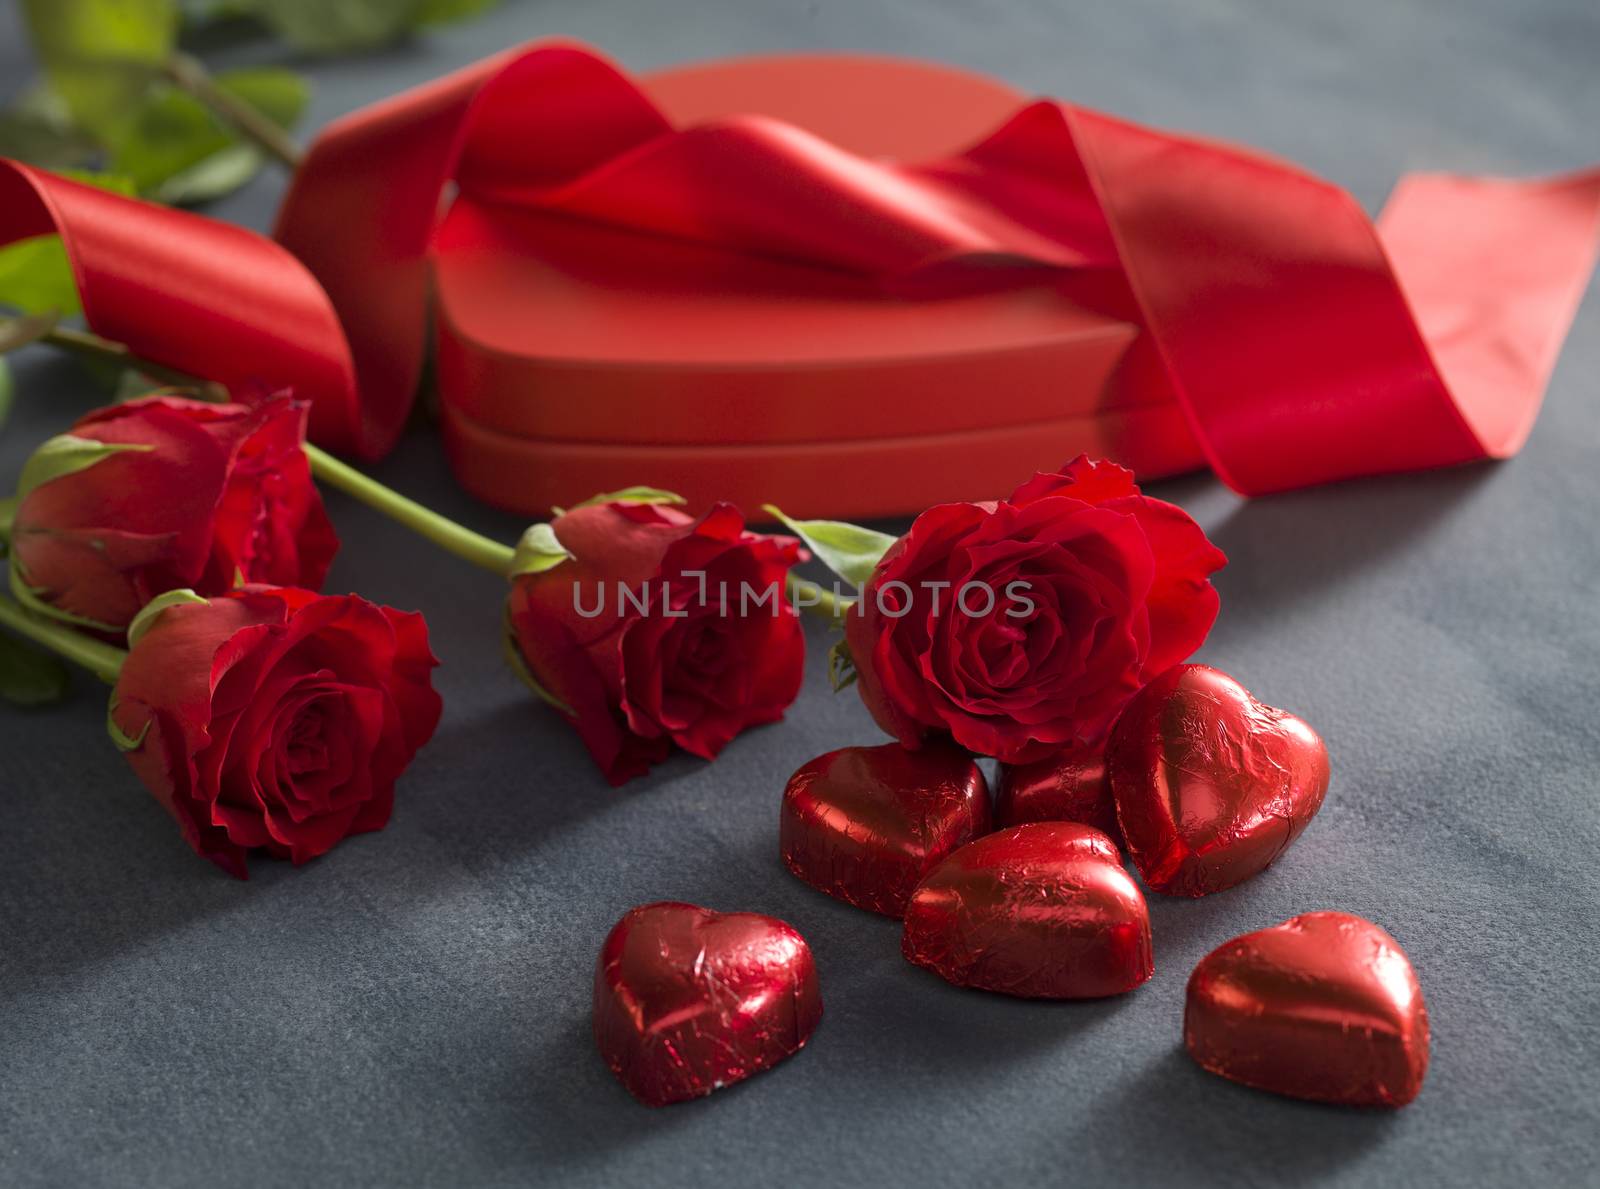 red hearts chocolates in front of red roses and hart shaped box. Valentines Day concept